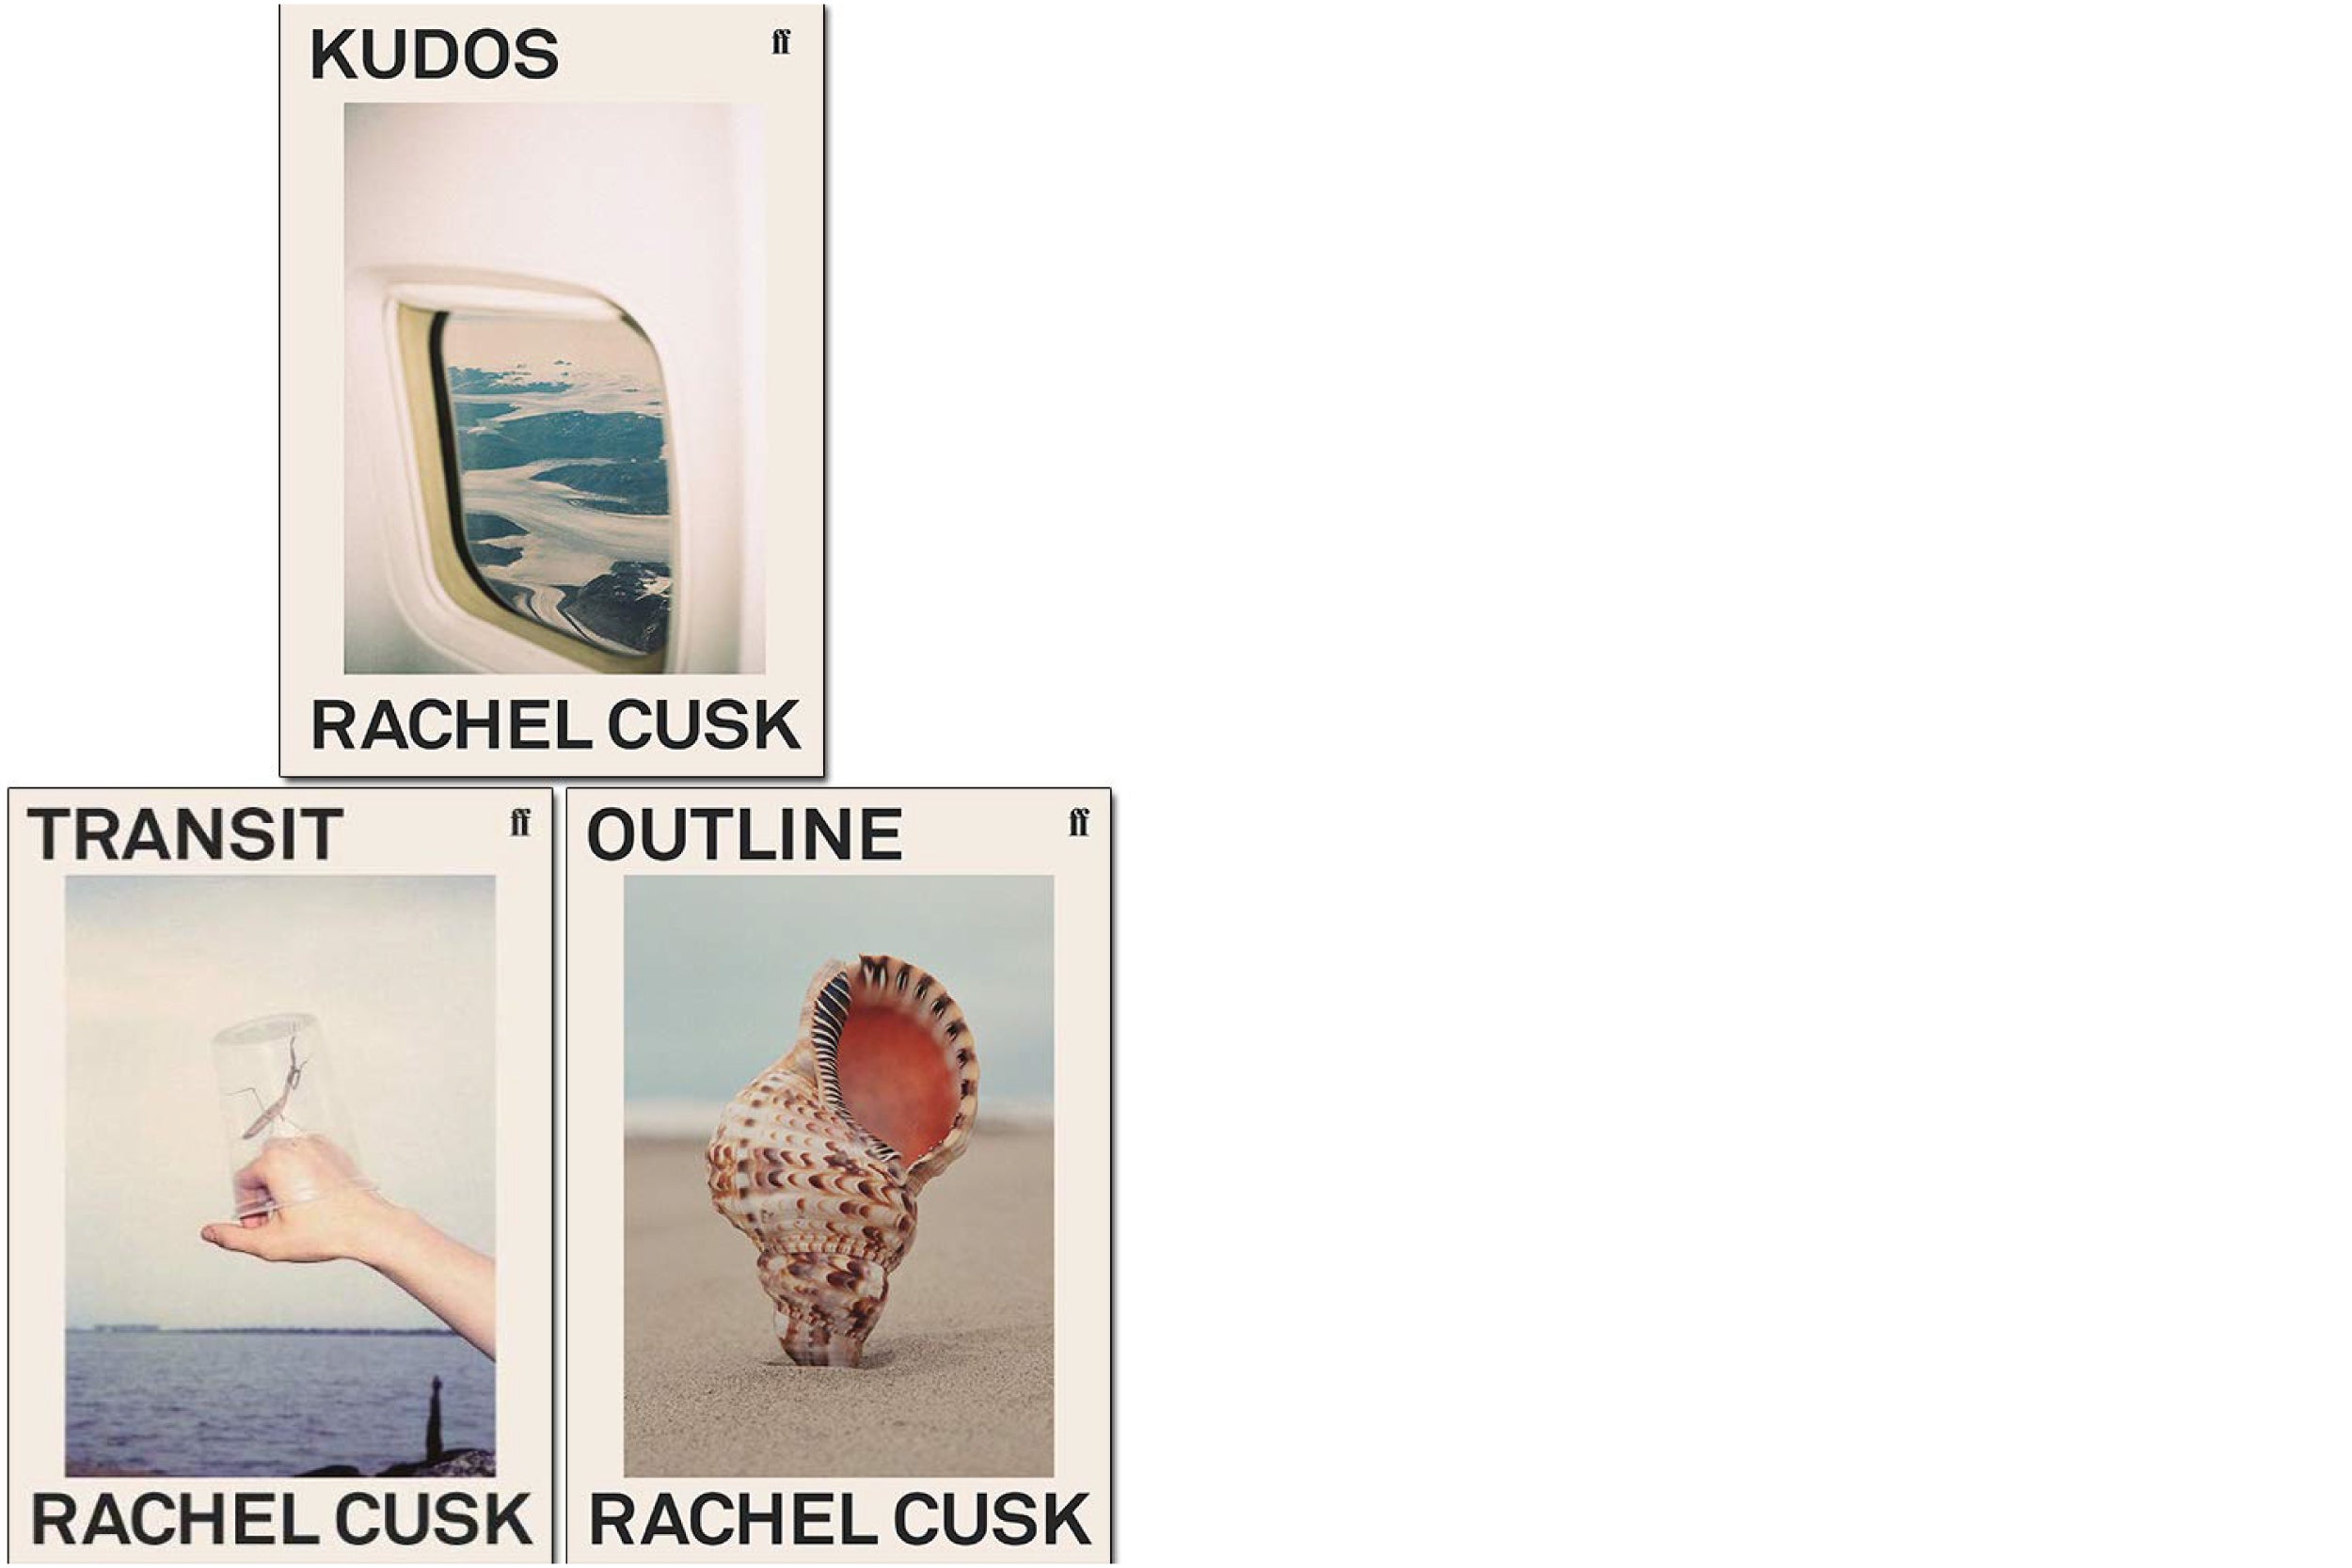 Book covers: “Outline, Transit, and Kudos” (Trilogy) by Rachel Cusk.